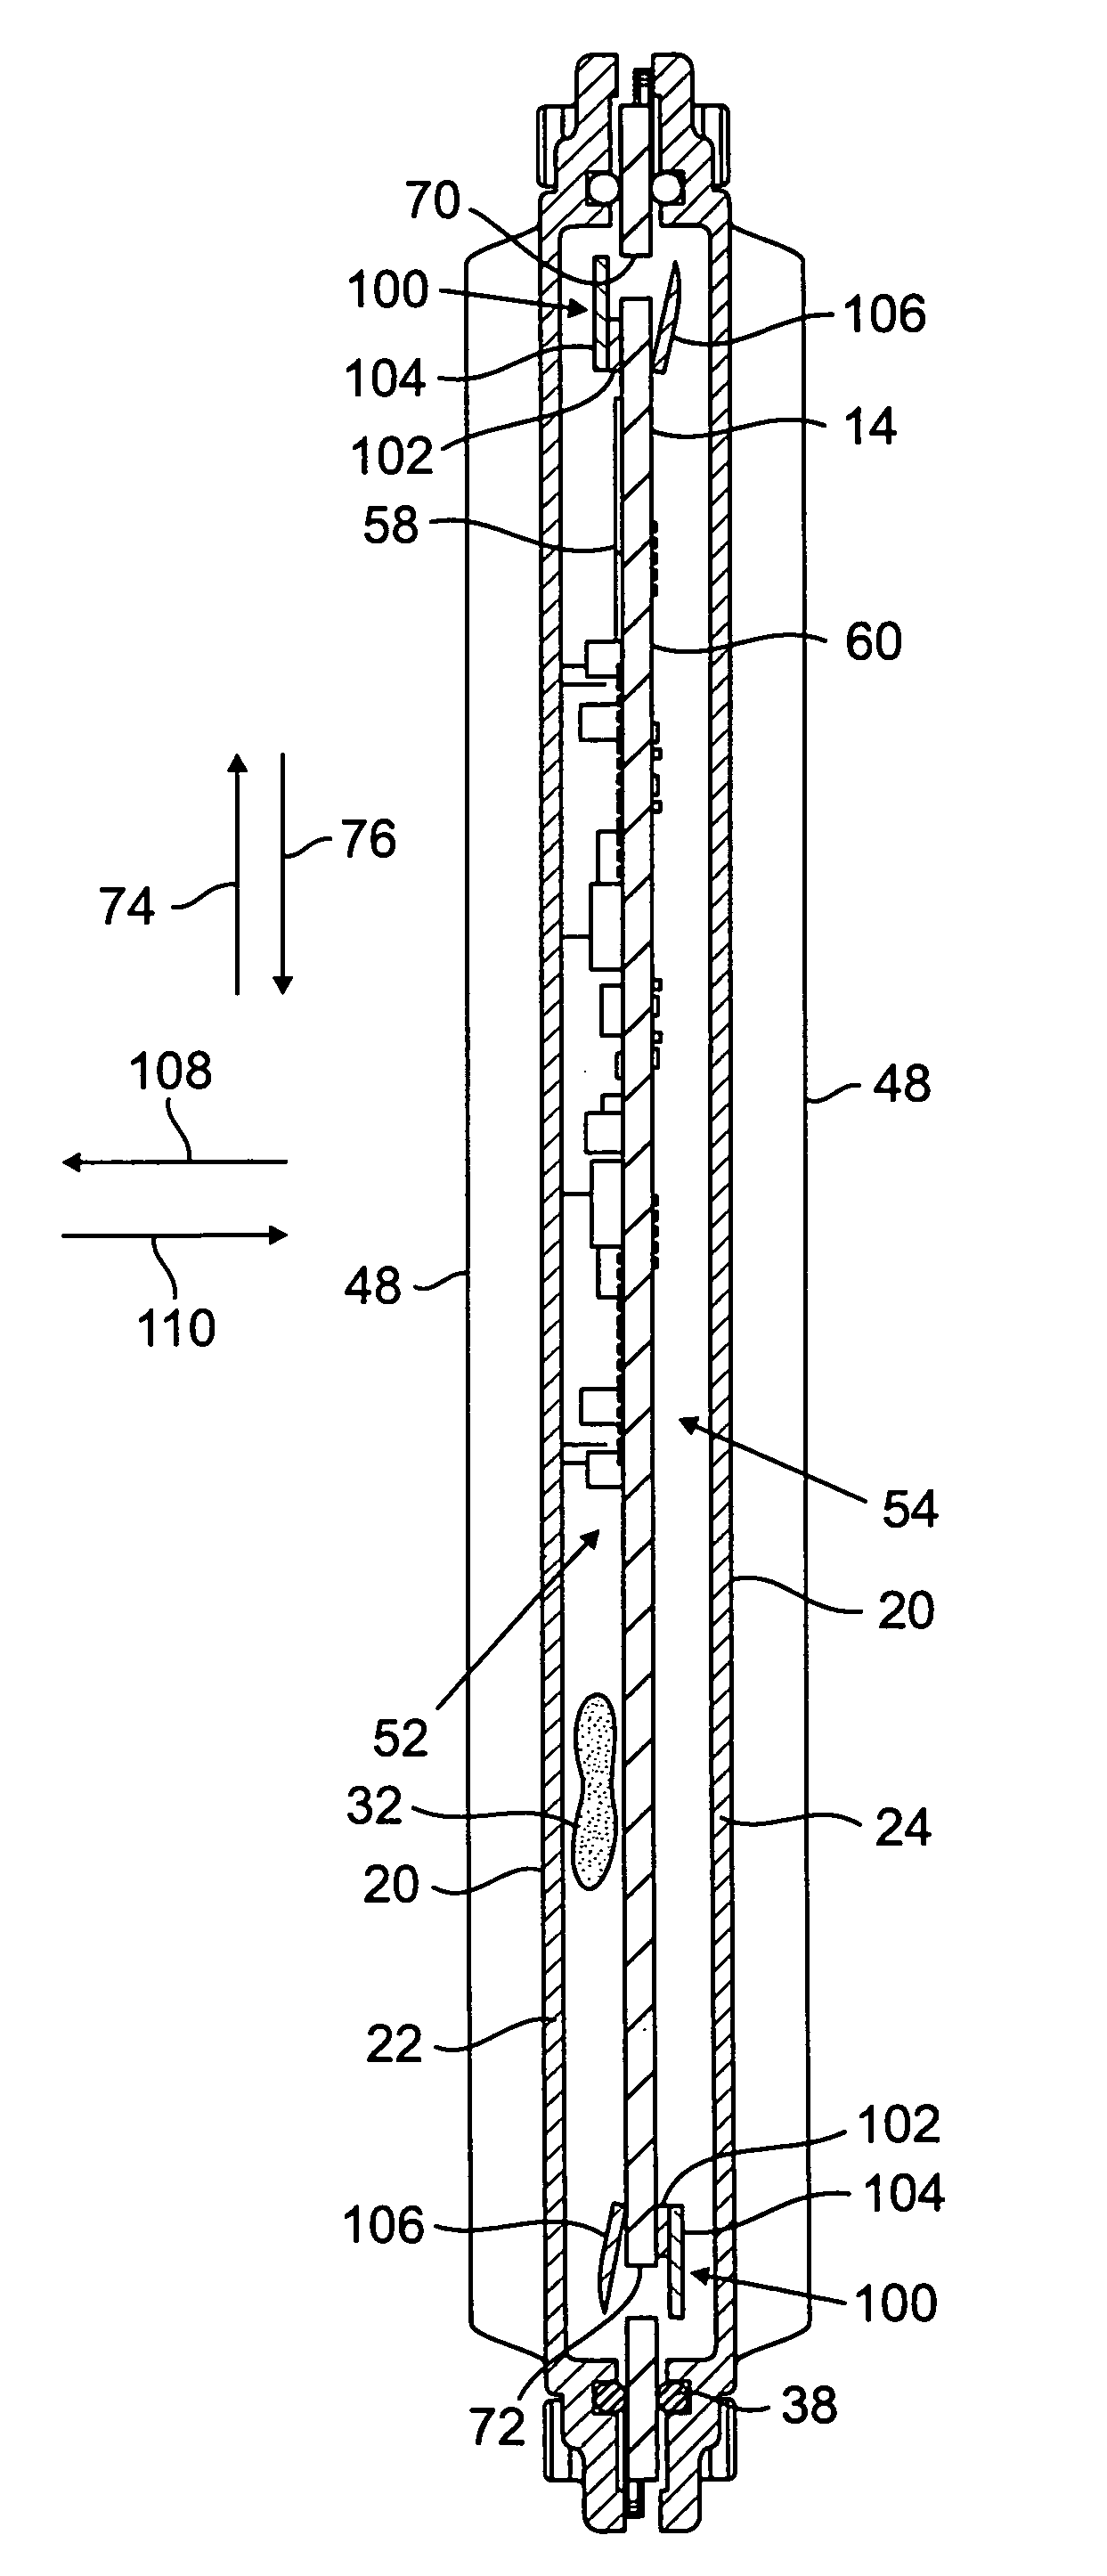 Arrangement for liquid cooling an electrical assembly using assisted flow